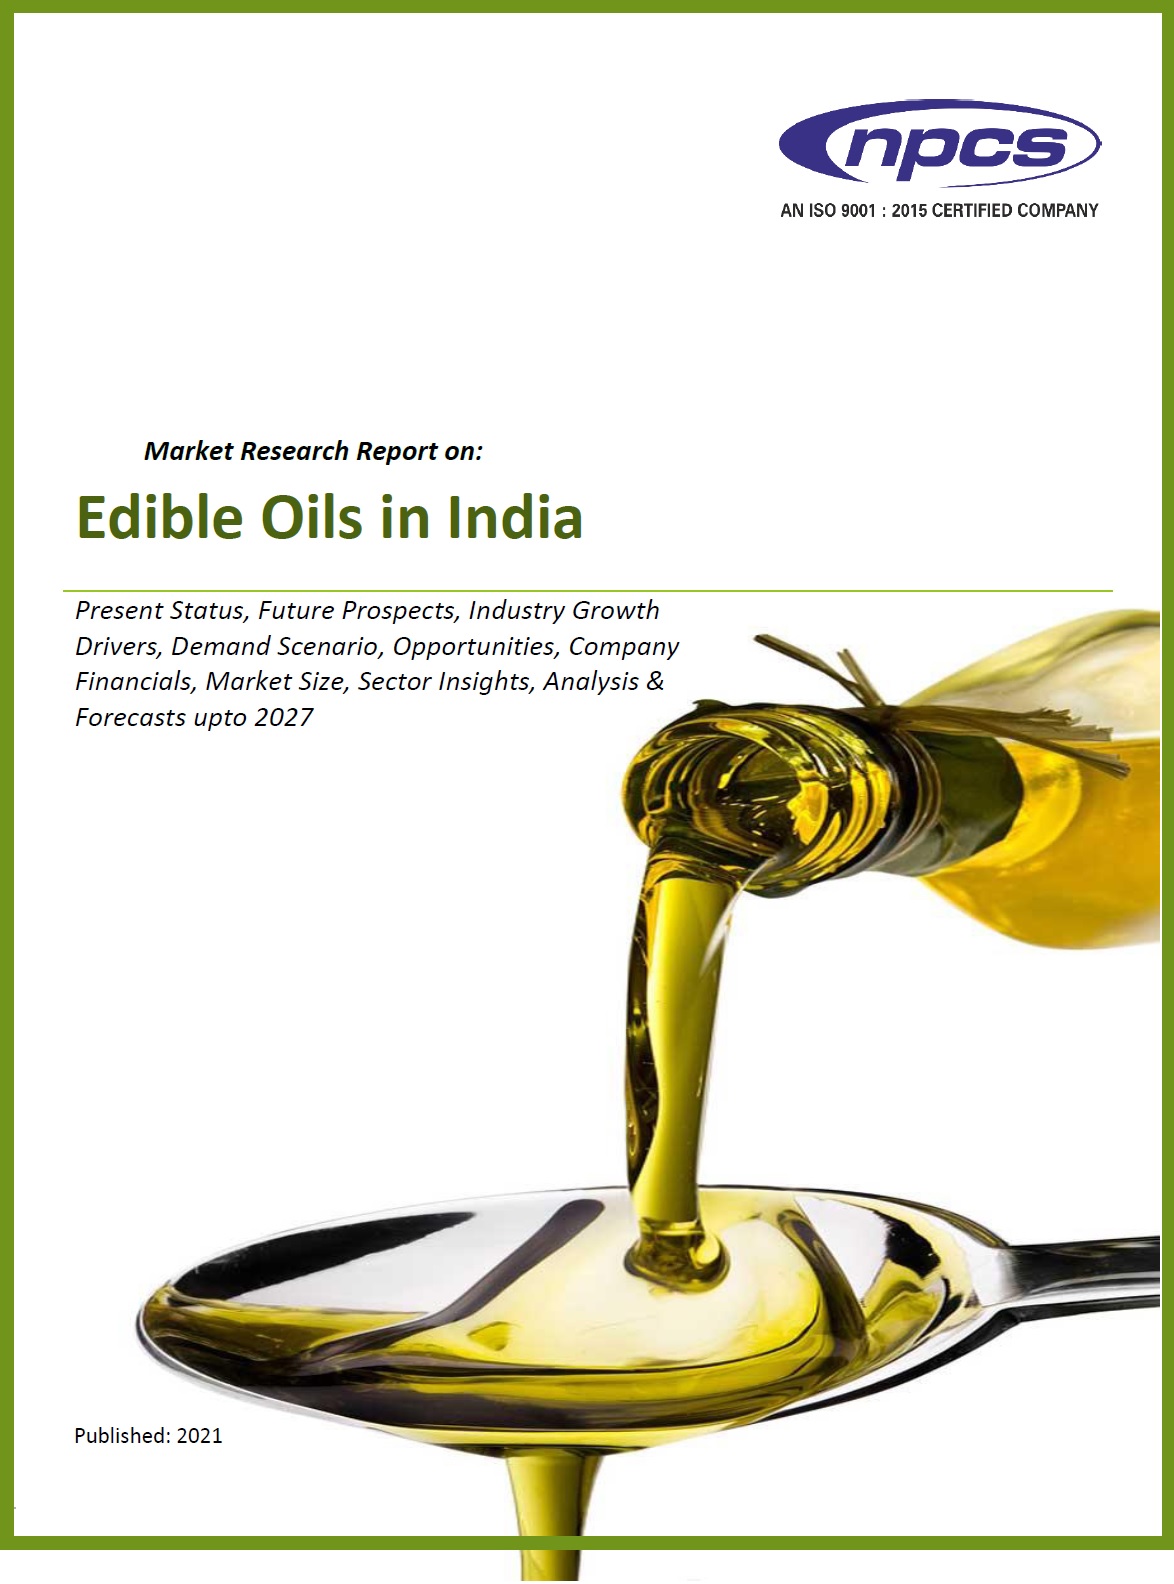 Edible Oils in India (Present status, Future Prospects, Industry Growth, Drivers, Demand Scenario, Opportunities, Company Financials, Market Size, Sector Insights, Analysis & Forecast Upto 2027) Market Research Report